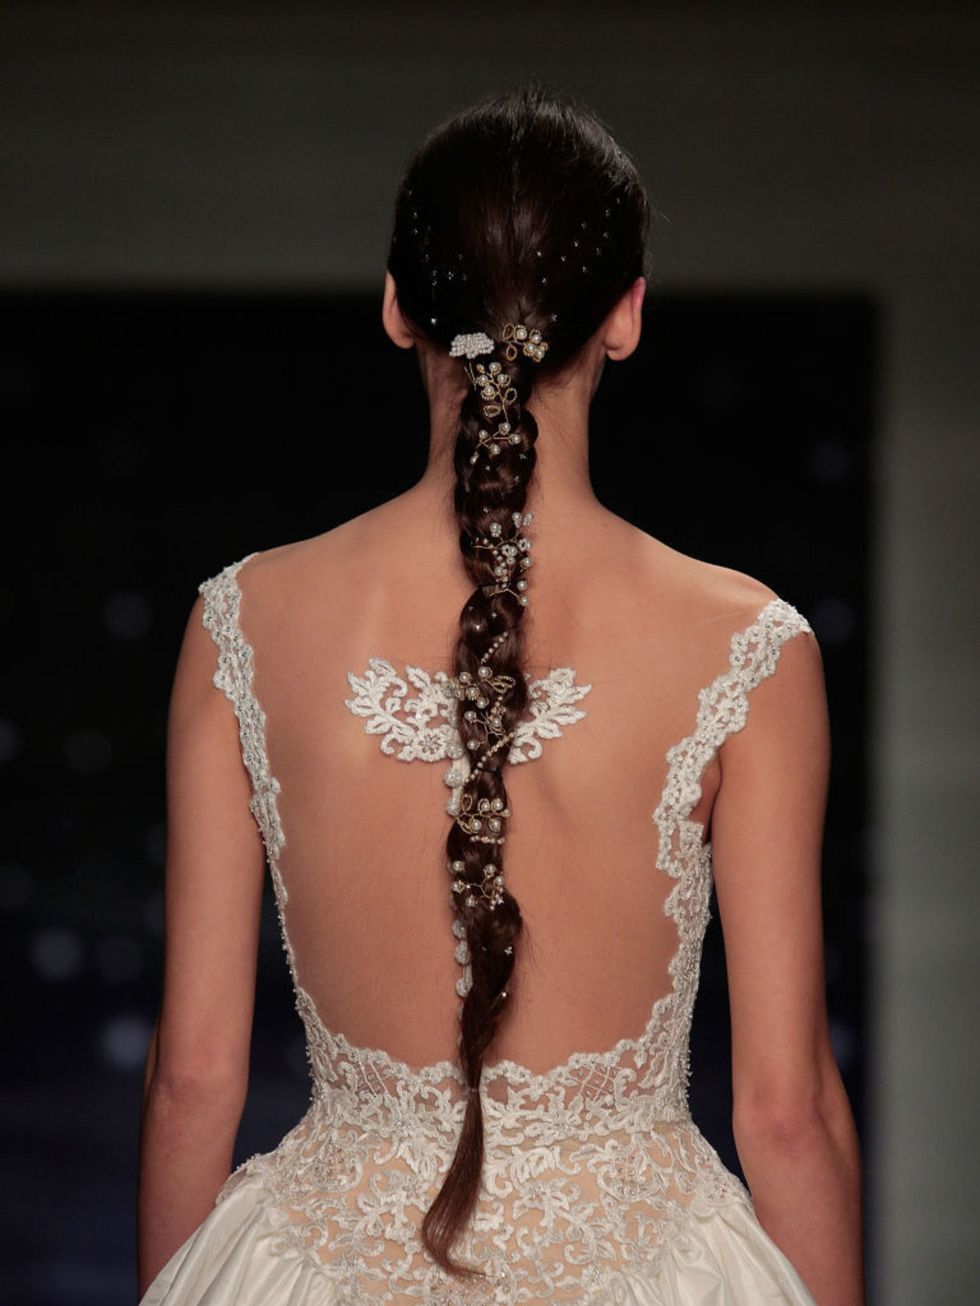 Uber-long braids were made opulent with pearls, crystals and lace at Reem Acra